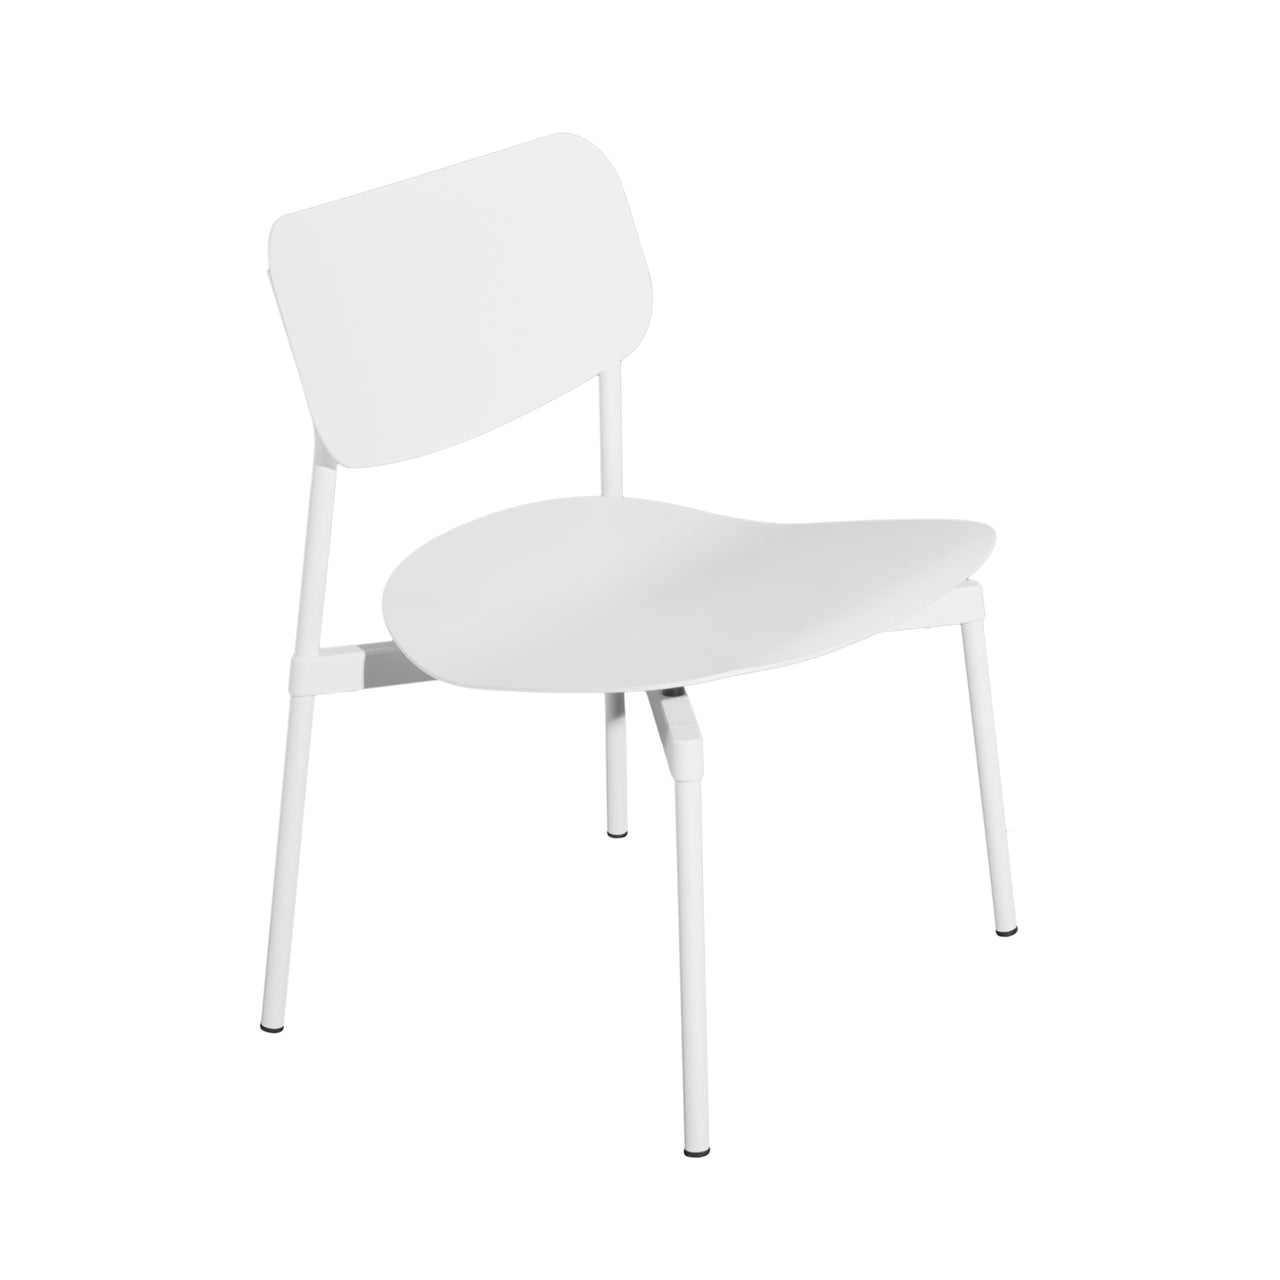 Fromme Stacking Lounge Chair: White